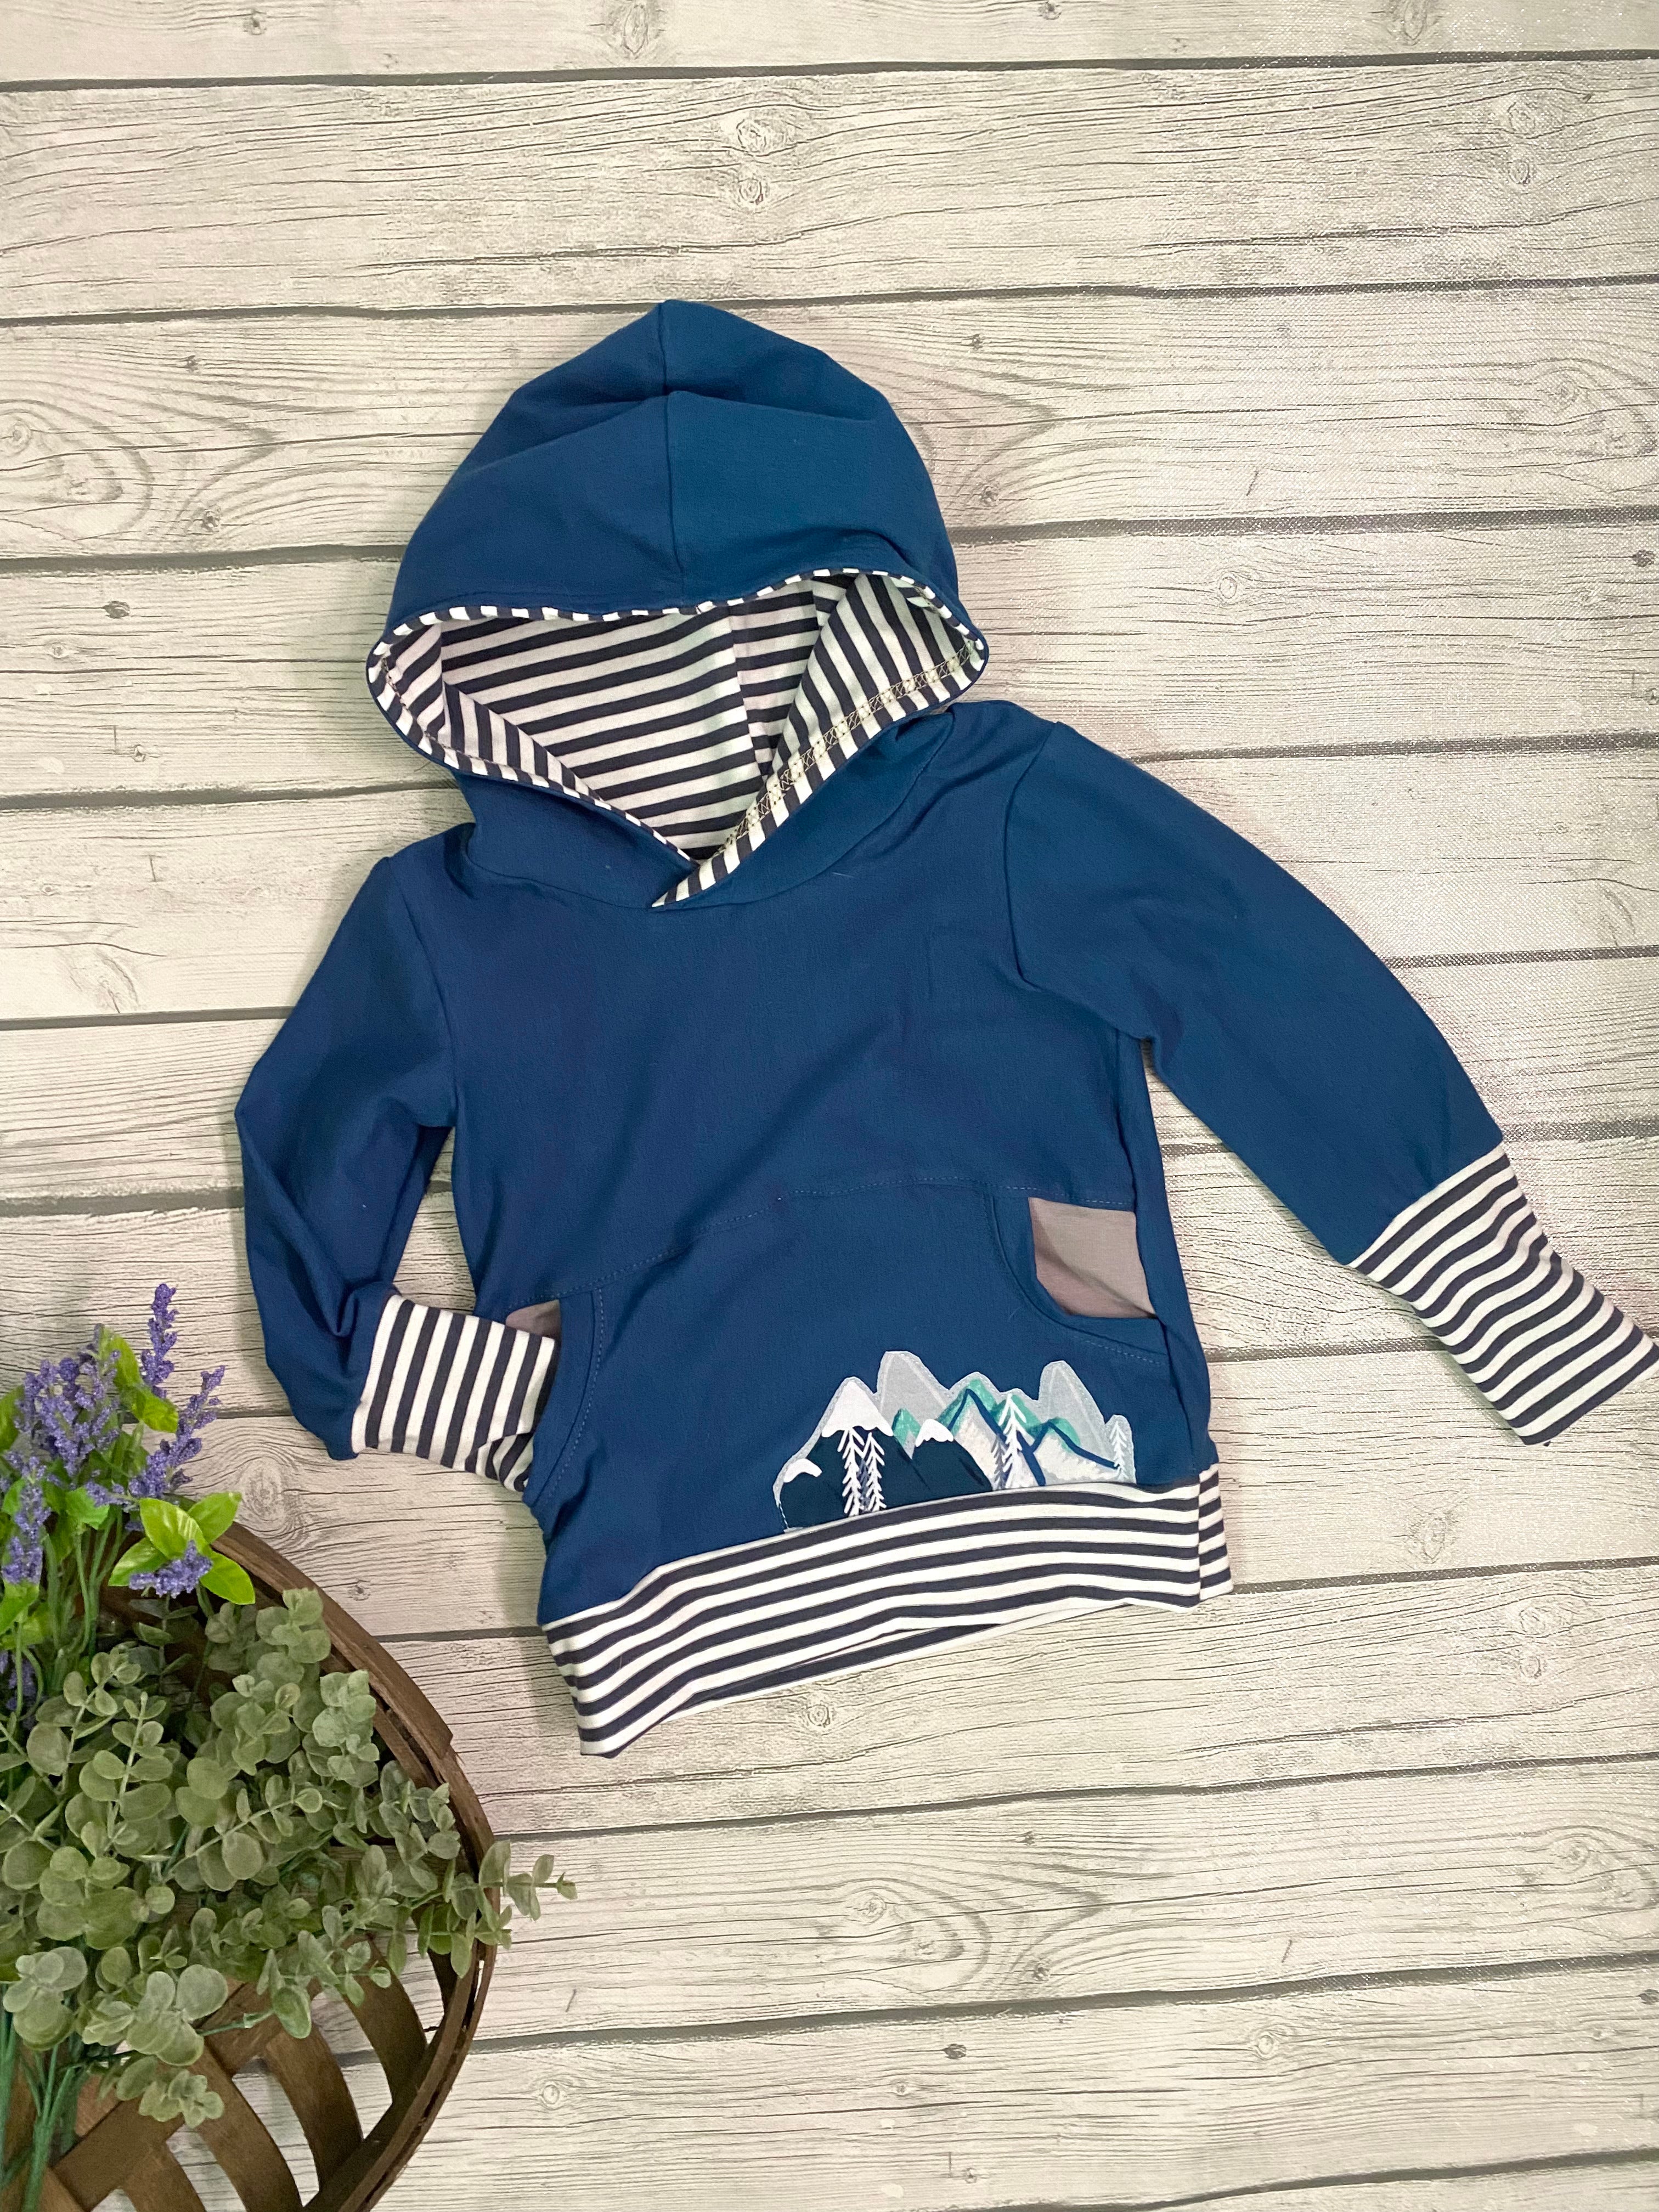 Teal and Stripe Hoodie w/ Mountain